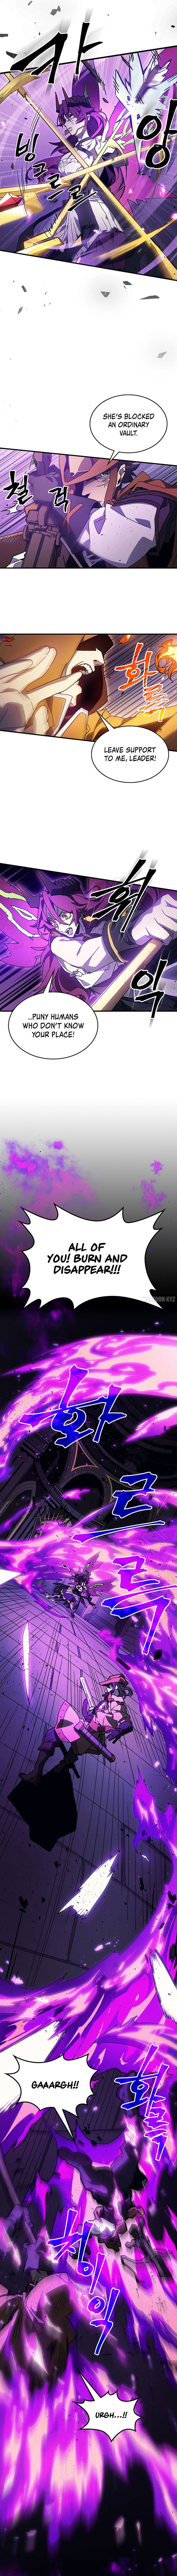 Mr Devourer, Please Act Like a Final Boss - Chapter 6 Page 6